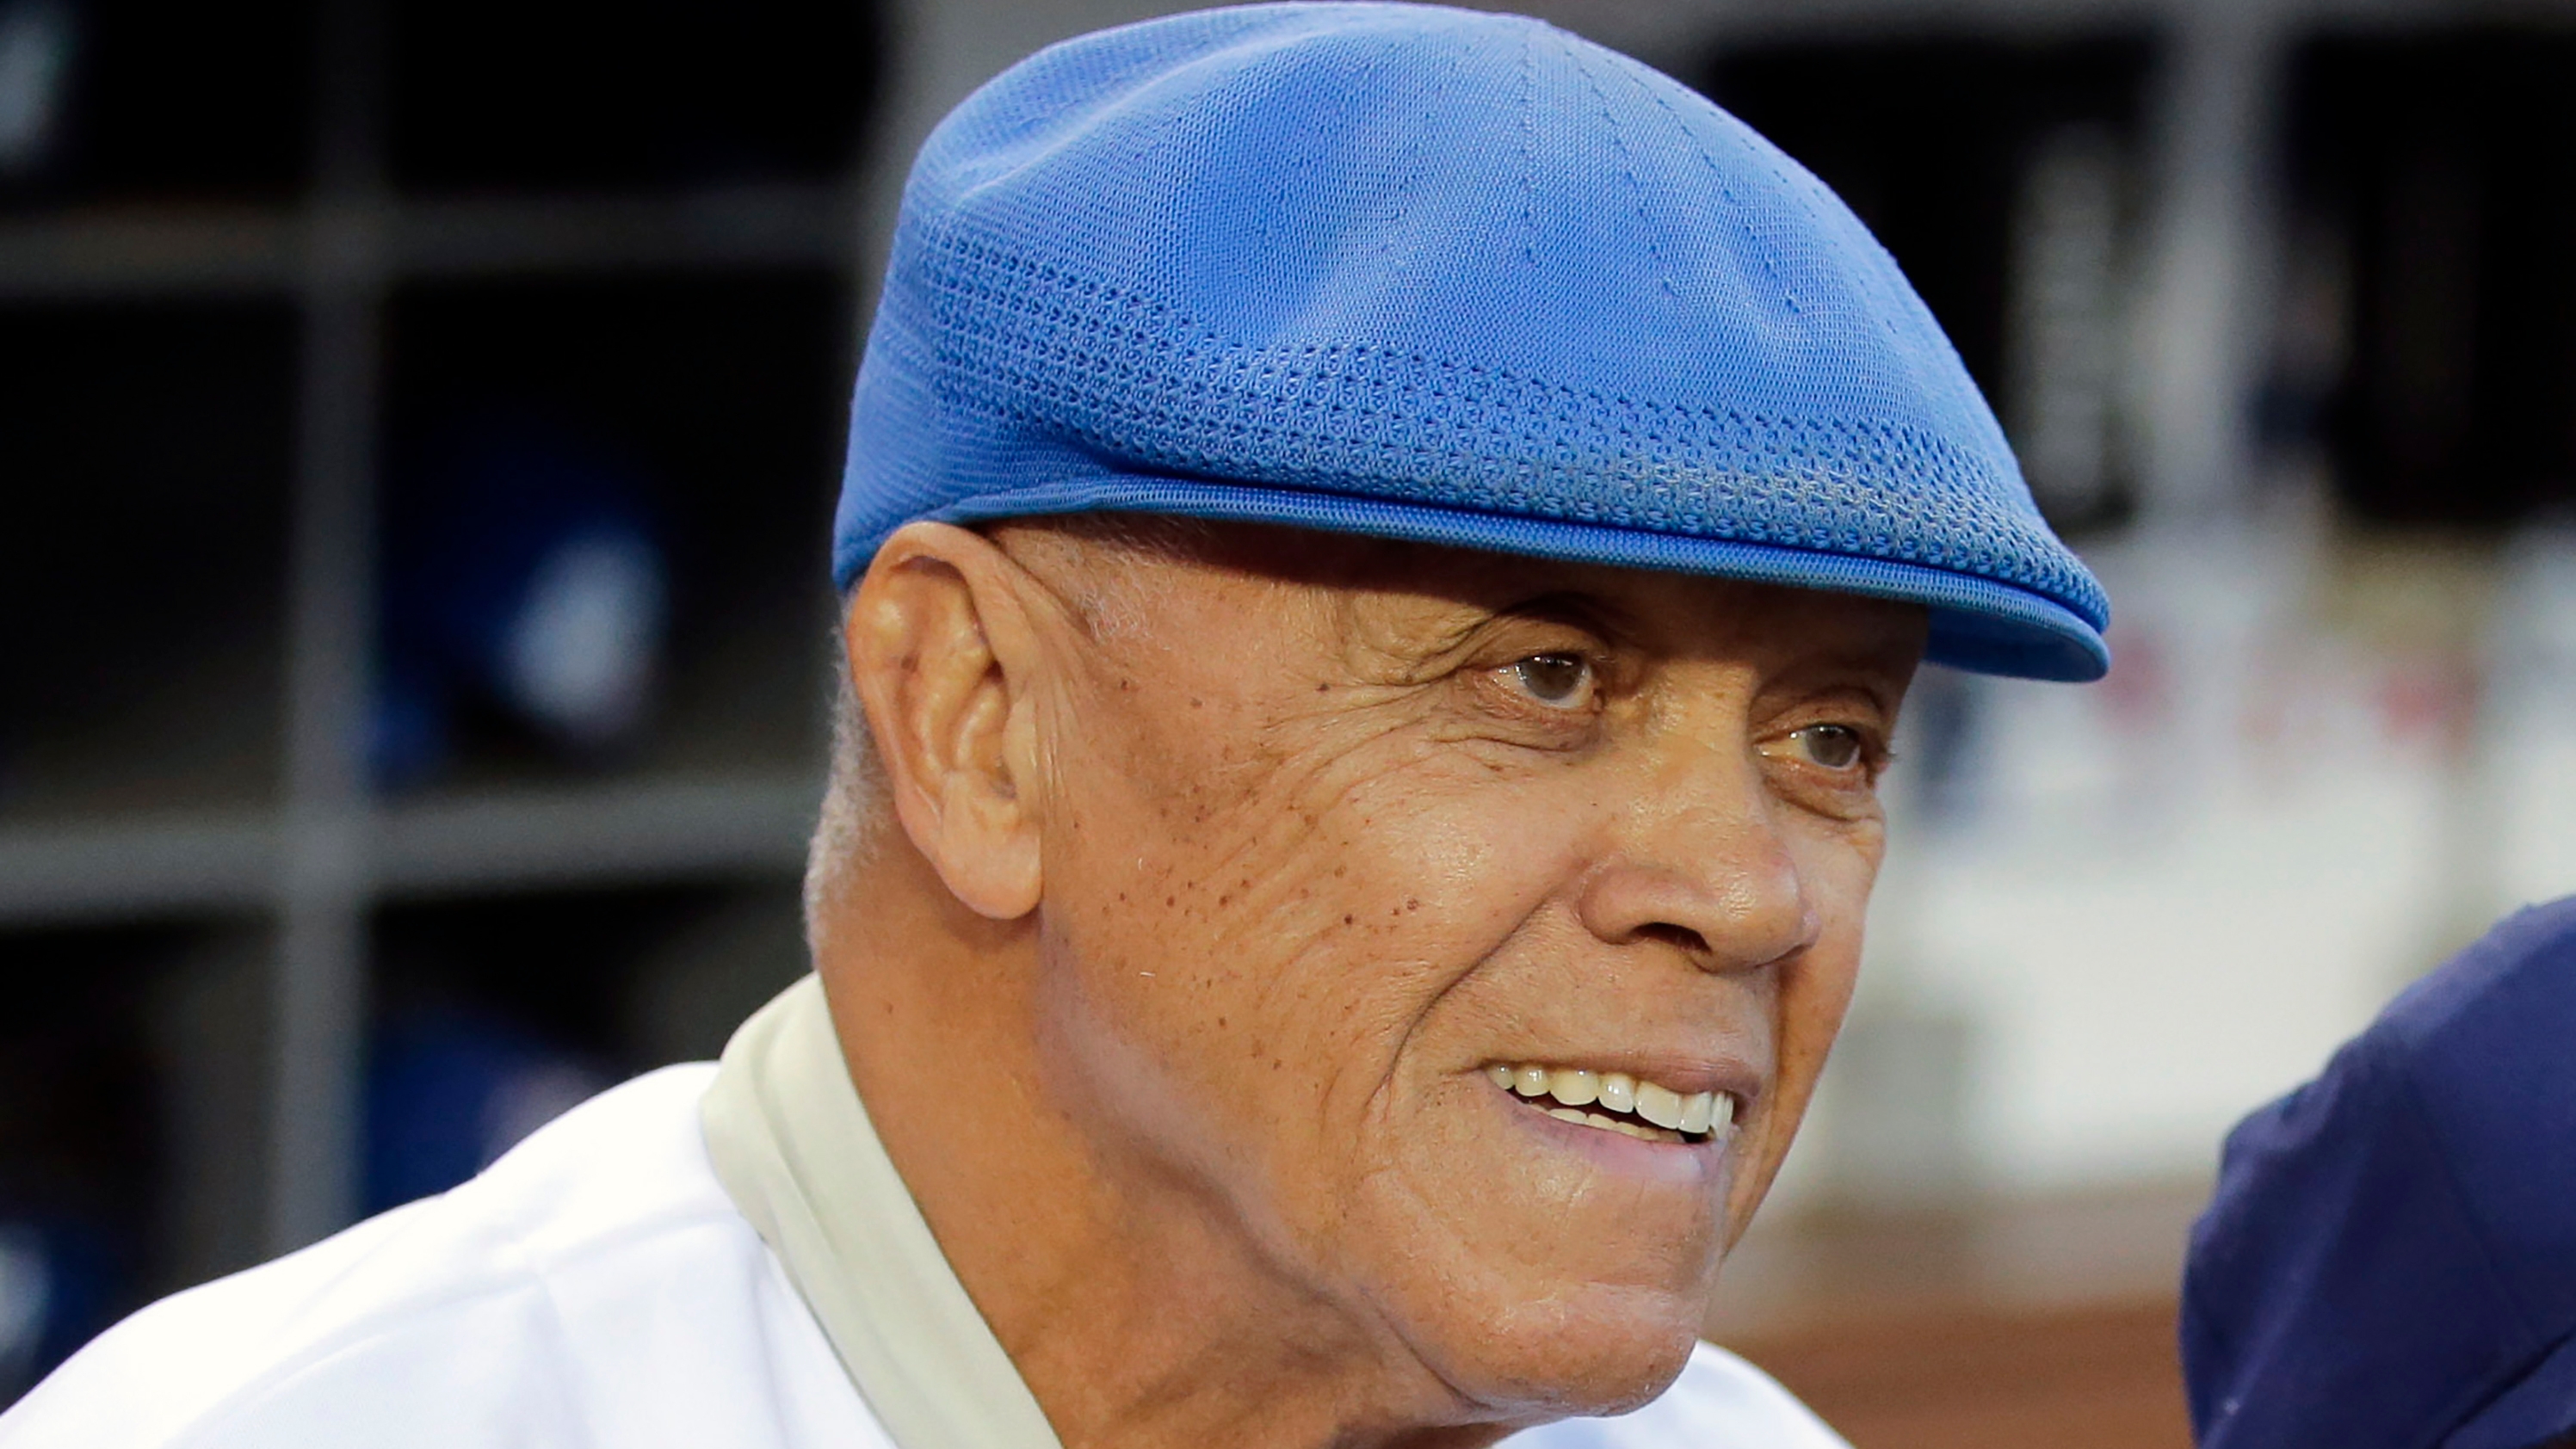 Maury Wills, base-stealing Dodgers great, dead at 89